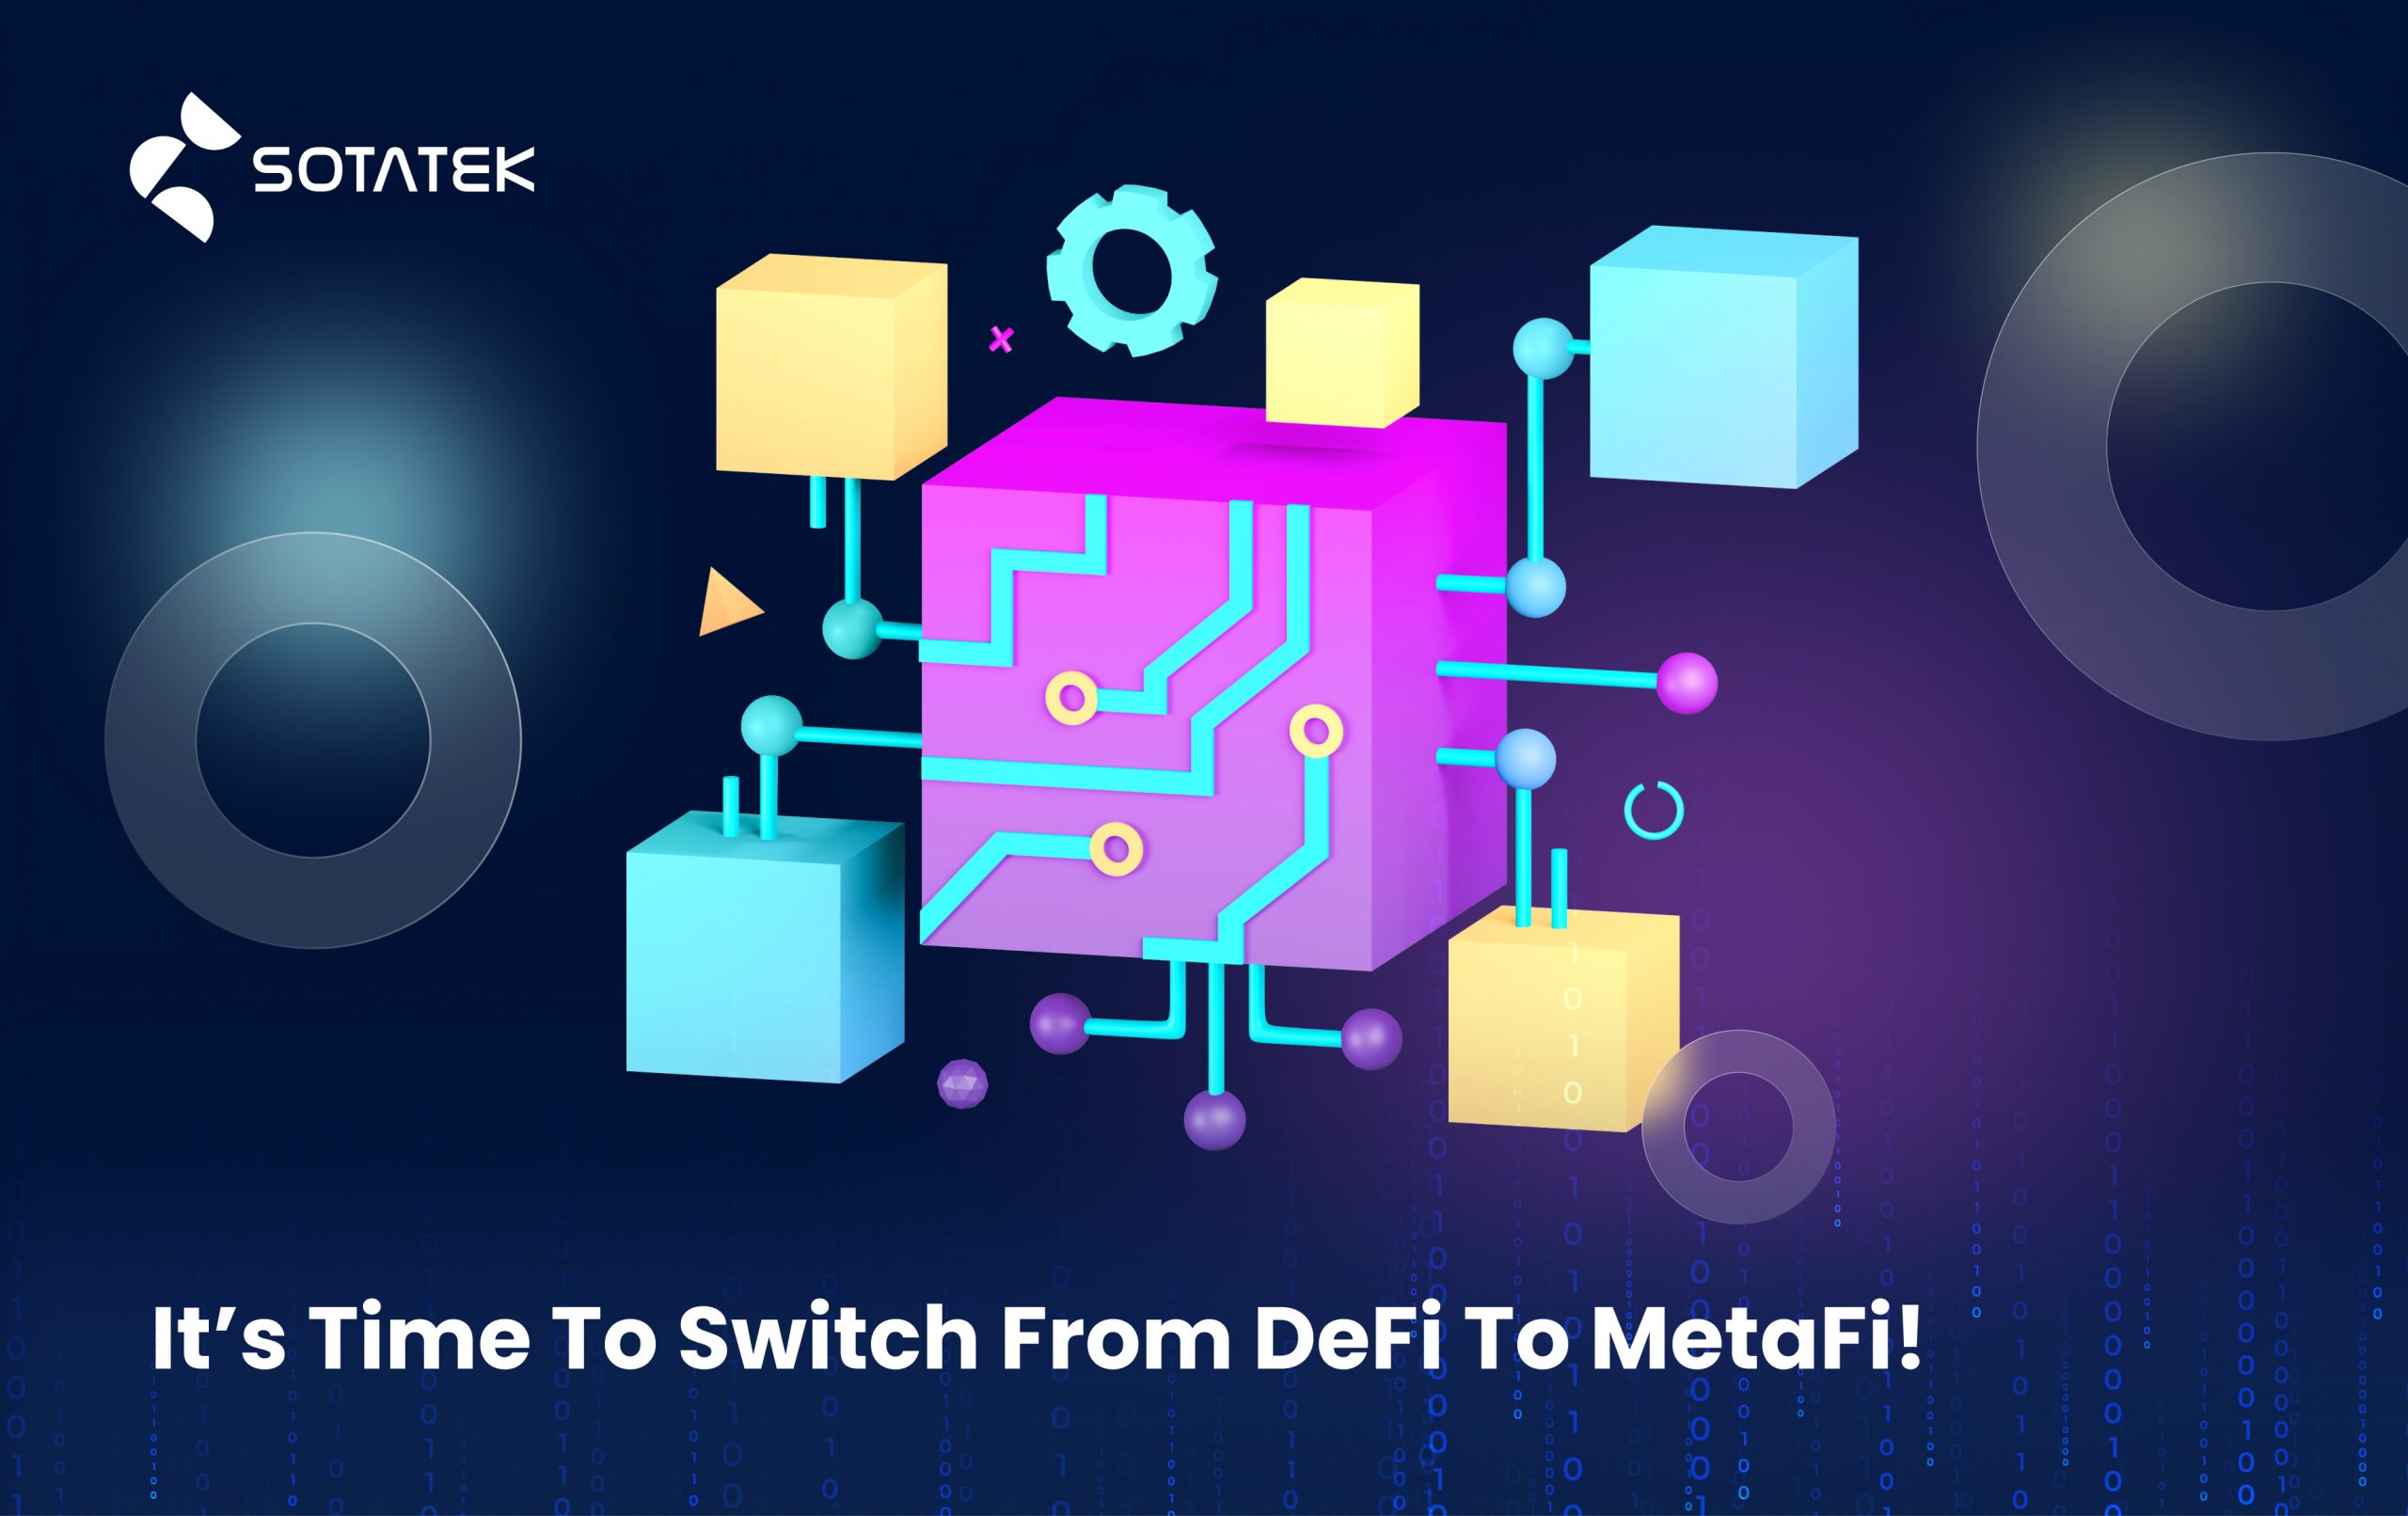 It’s-Time-To-Switch-From-DeFi-To-MetaFi!